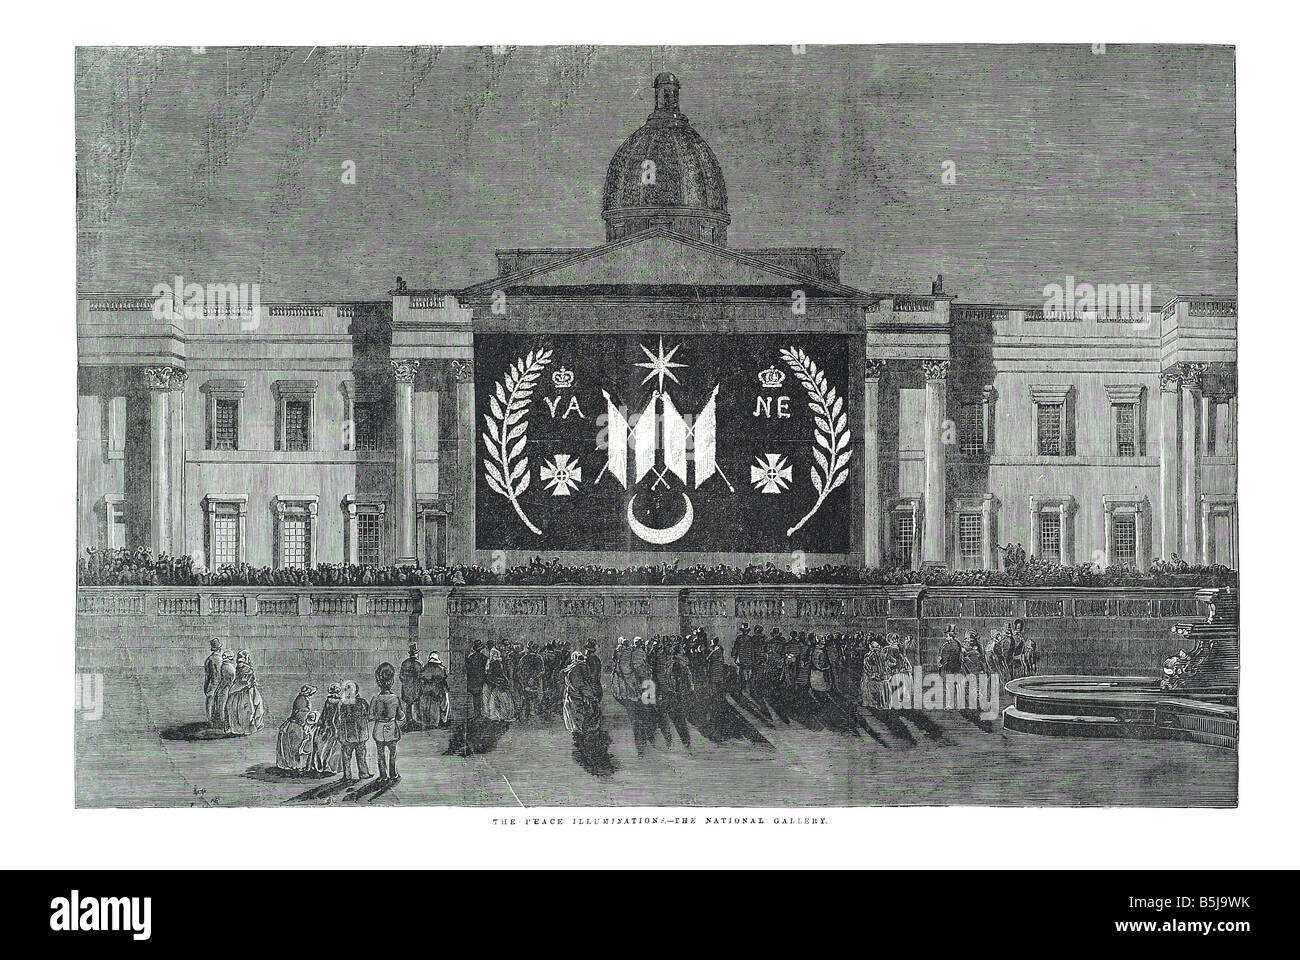 The peace illuminations the national gallery May 31 1856 The Illustrated London News Page 608 Stock Photo